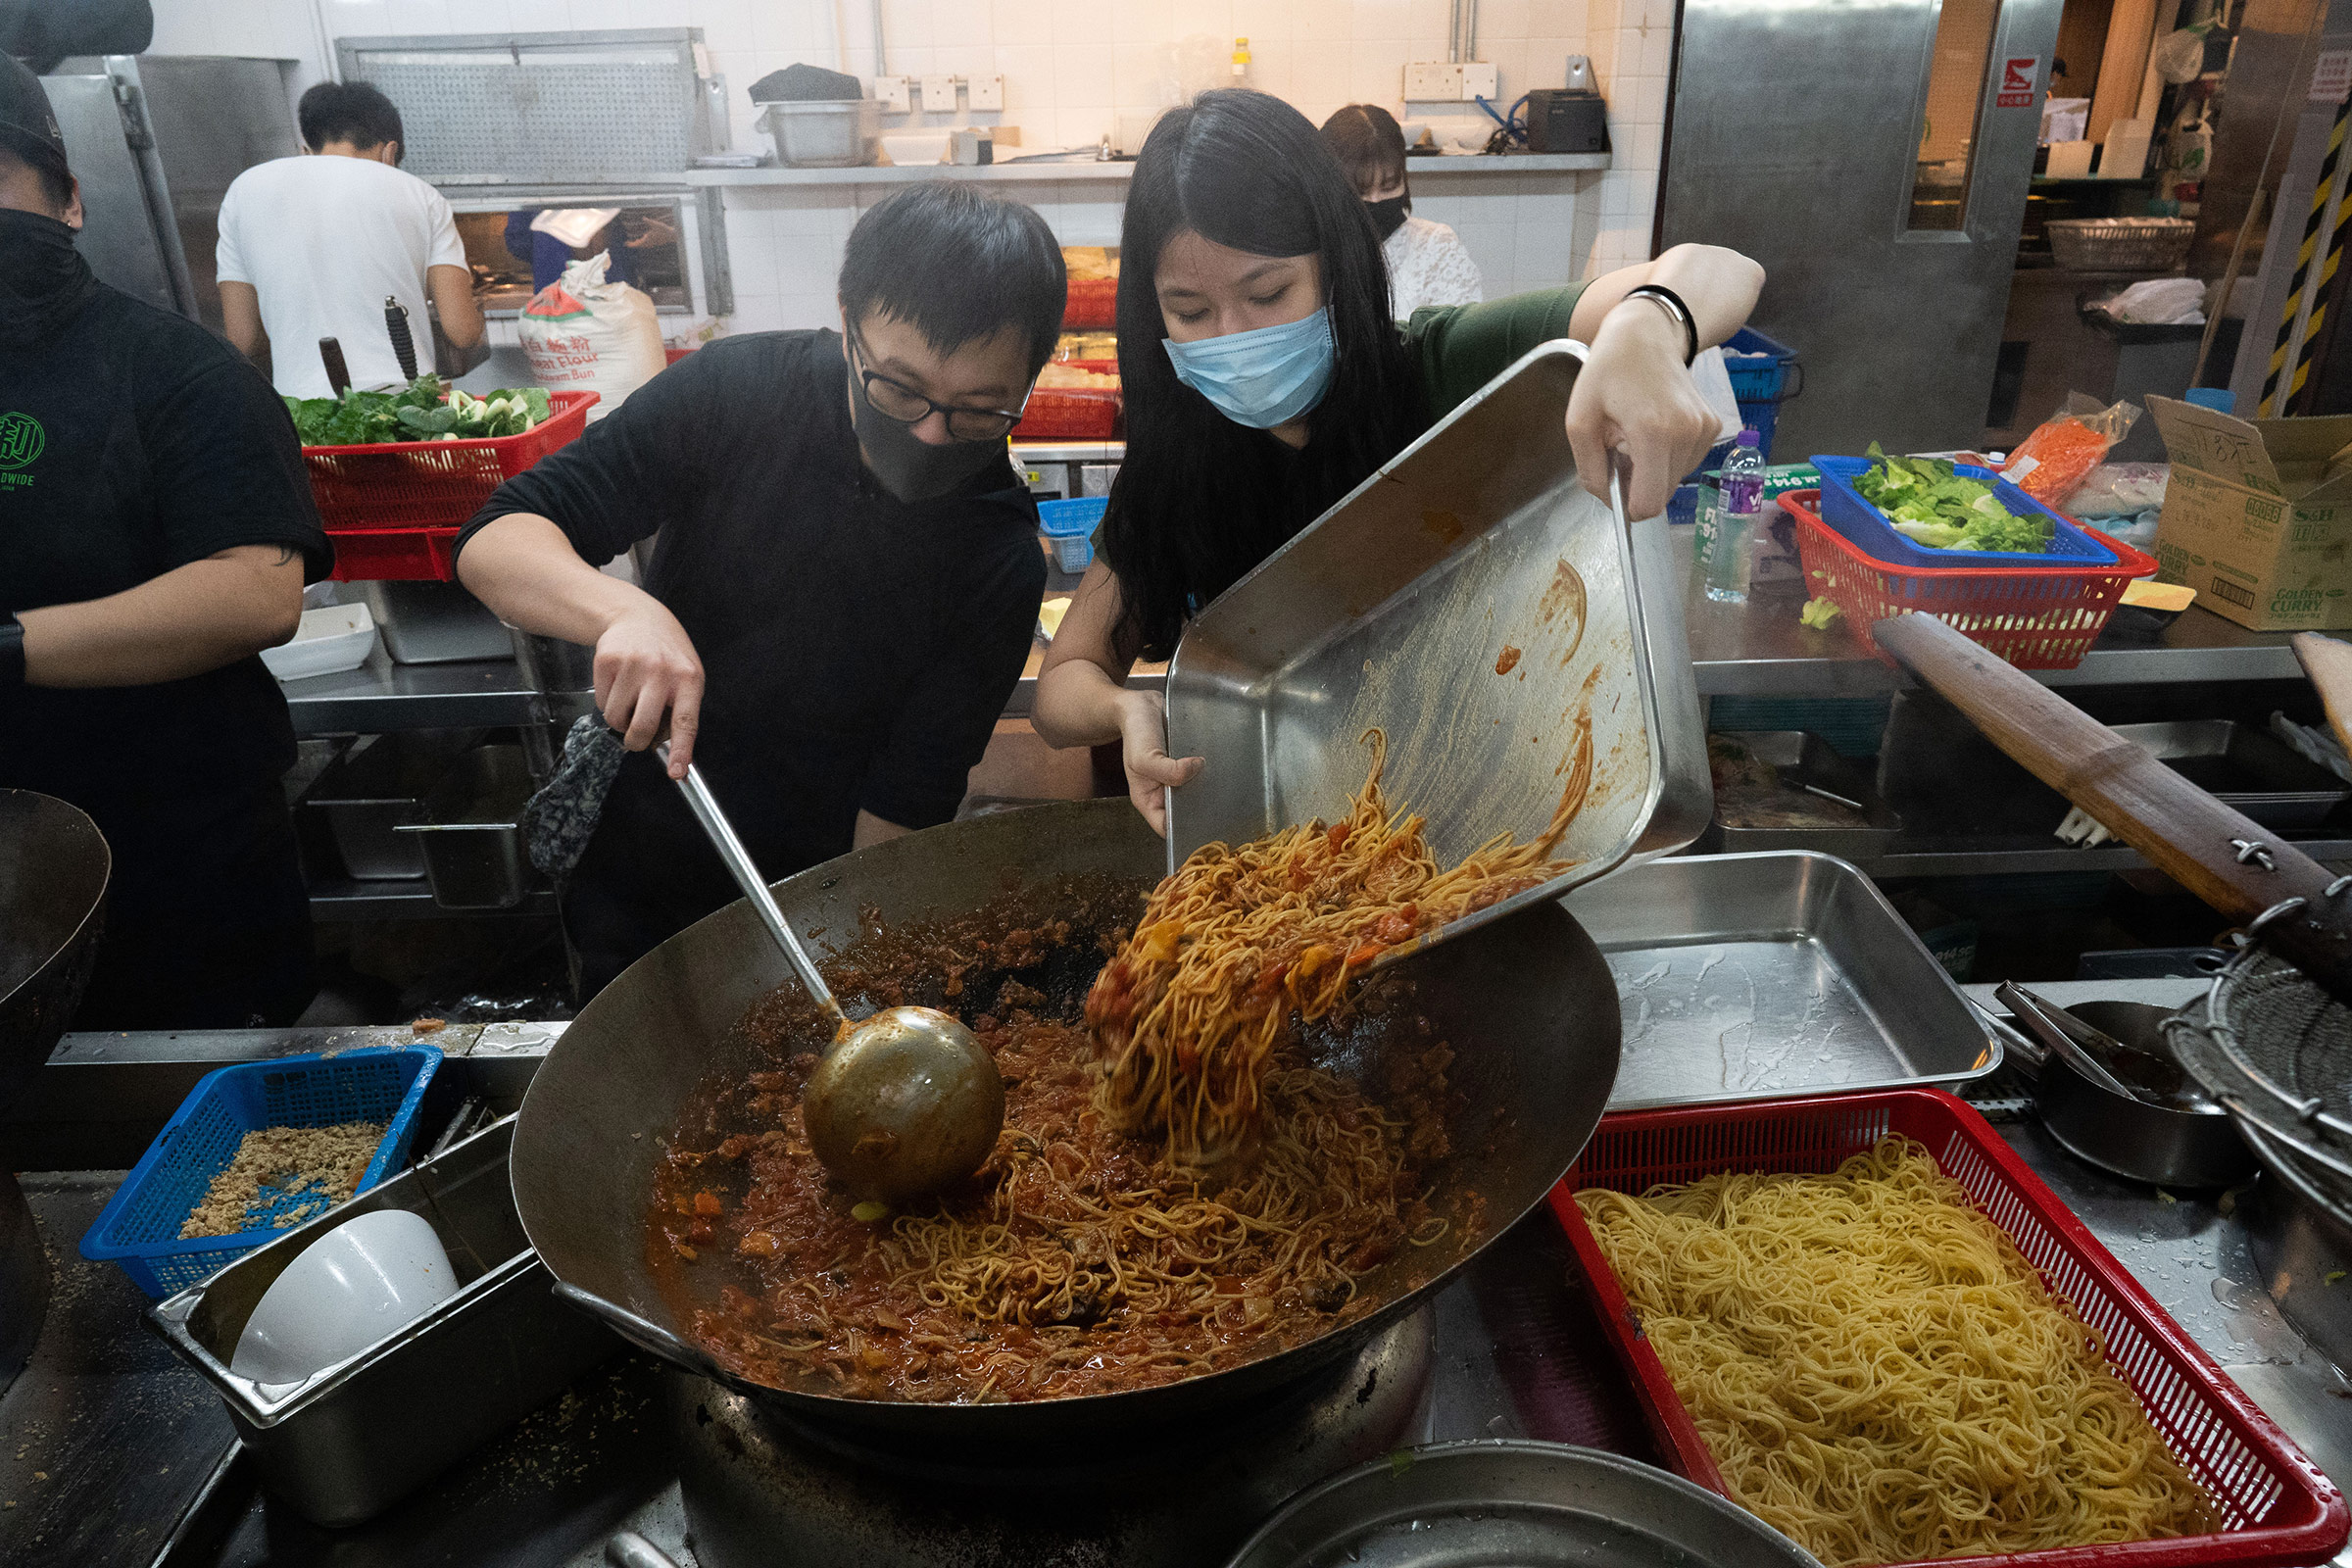 Volunteers, some of whom had never cooked before, help prepare food for the protestors gathered at PolyU, Nov. 14.